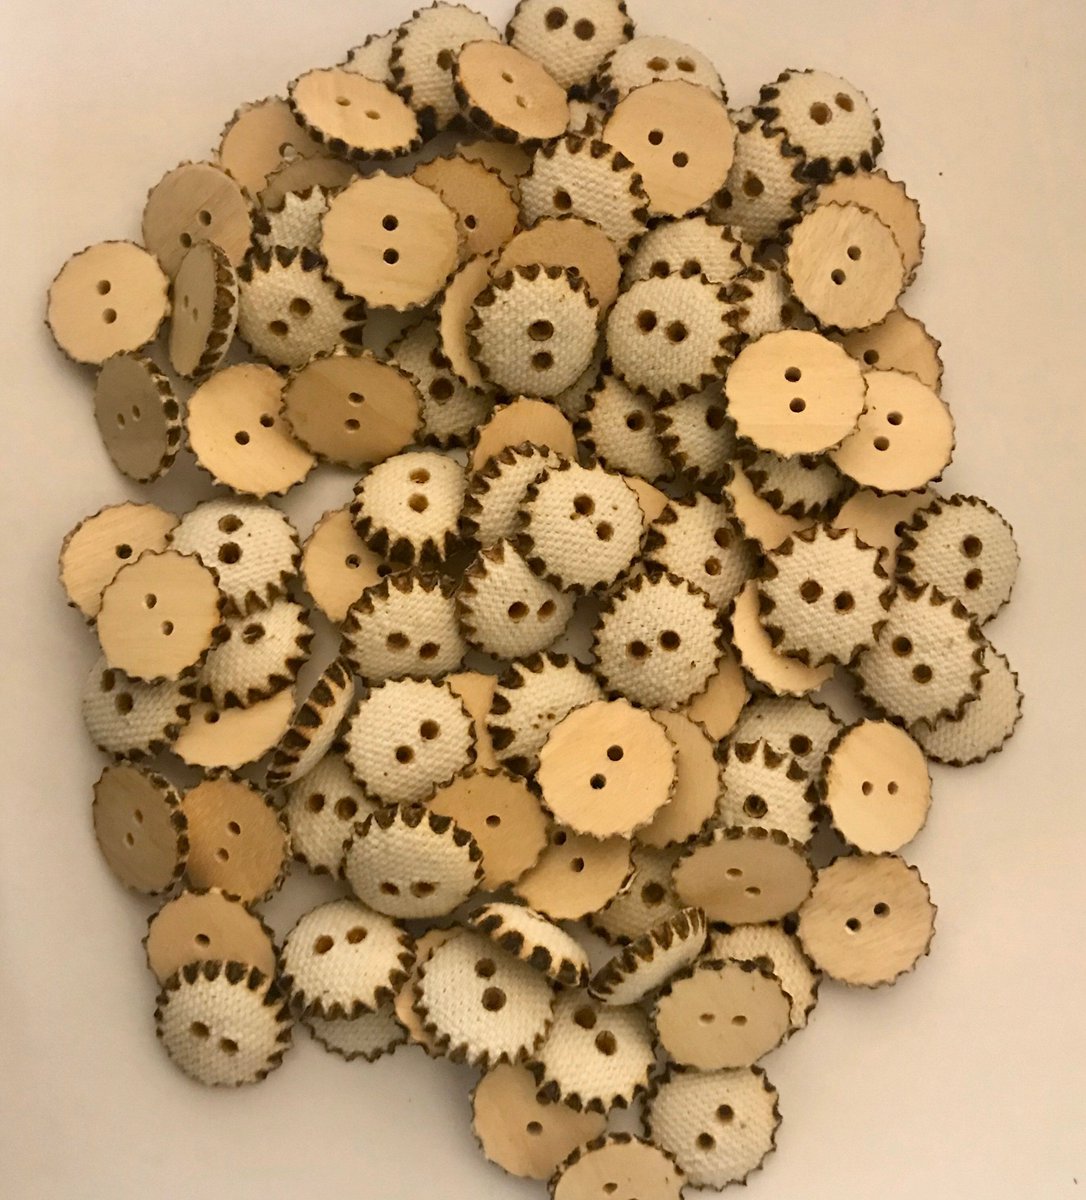 100 Vintage 13mm small round 2 holes coconut with abaca twine buttons lot of 100 by BySupply tuppu.net/3939a931 #bysupply #Etsy #Destash